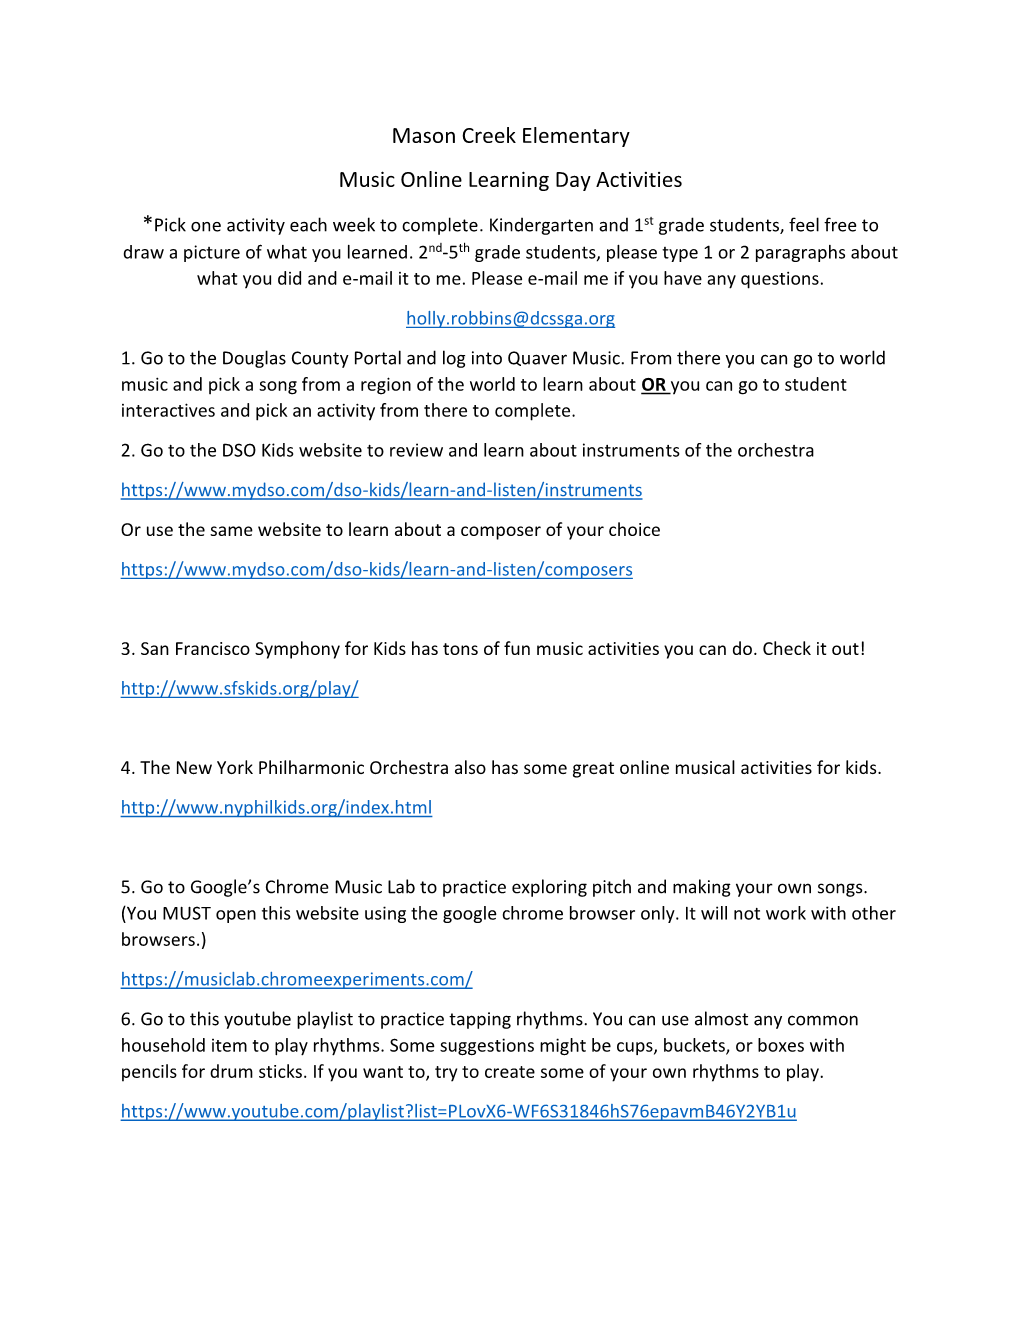 Mason Creek Elementary Music Online Learning Day Activities